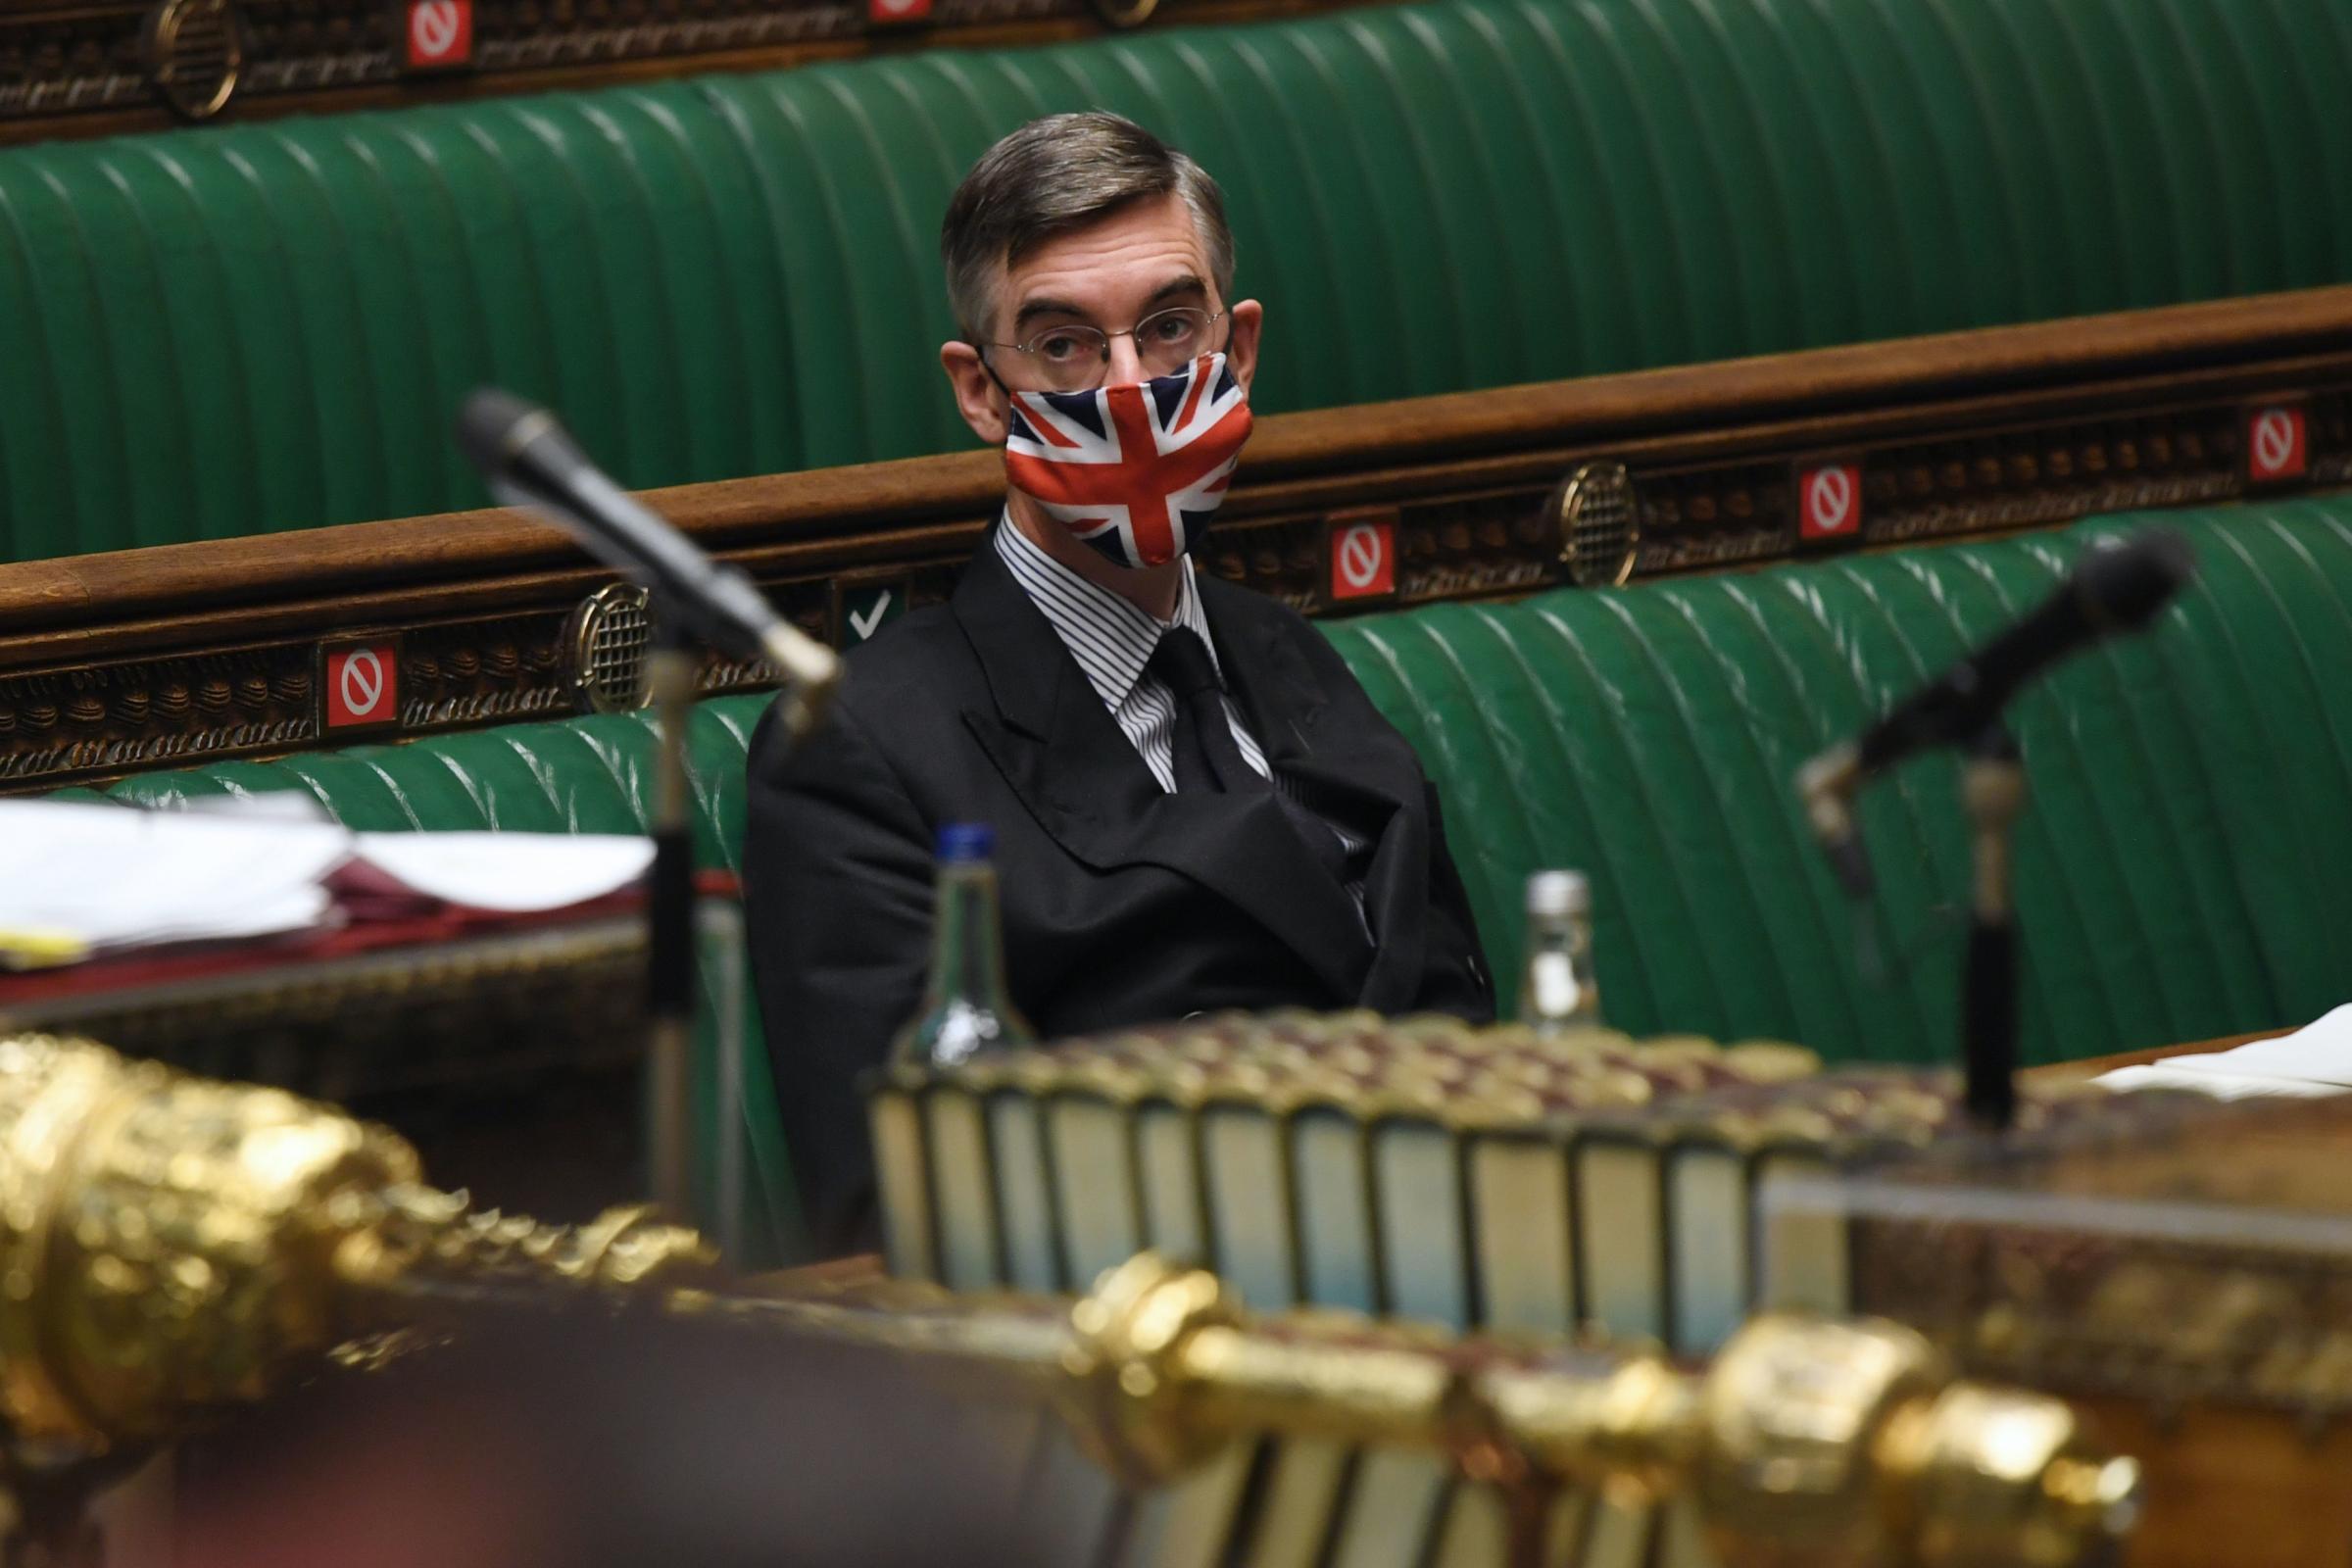 Jacob Rees-Mogg’s arrogant dismissal has sealed the fate of the Union